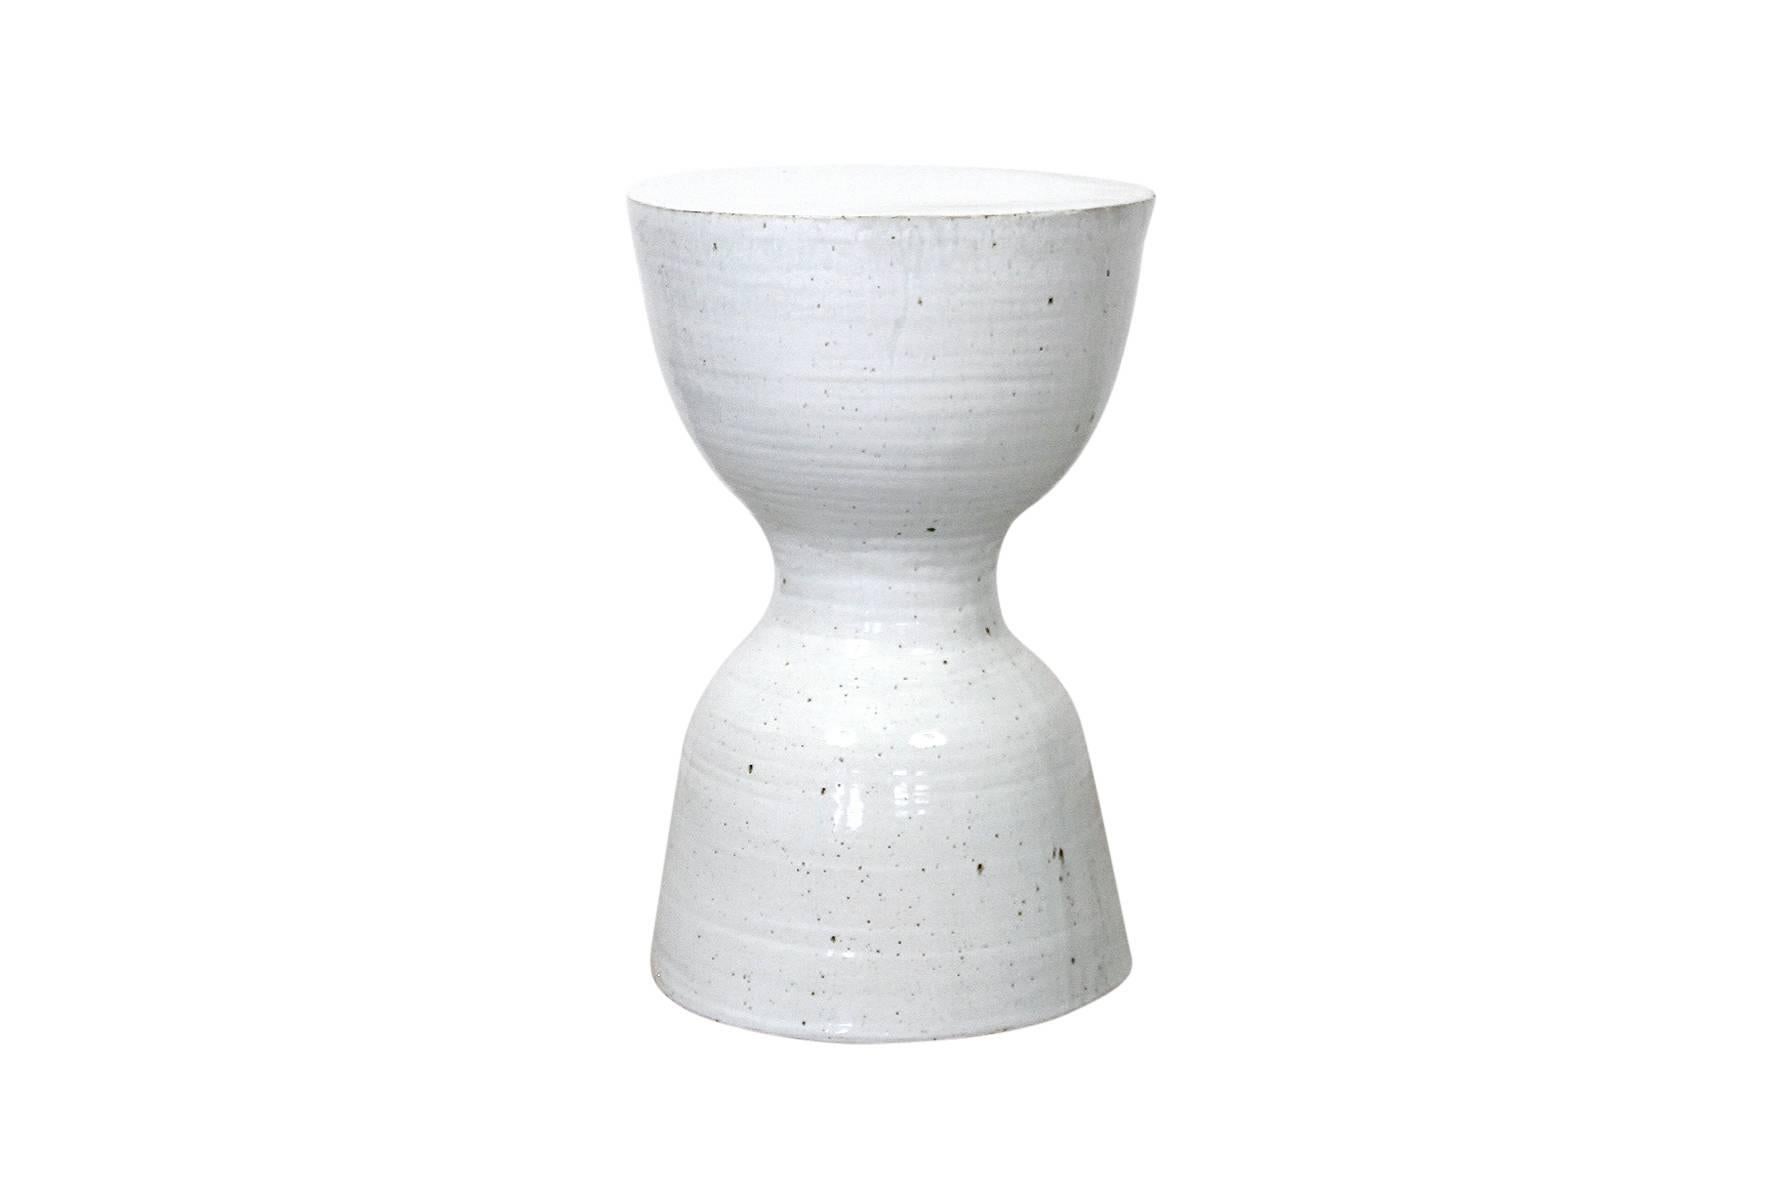 Larger scaled white glazed hourglass ceramic stool or table by Tariki Studio. This piece features a delicate textural white glaze inspired by the work of renowned British studio potter Bernard Howell Leach. Known at Studio Tariki as the 